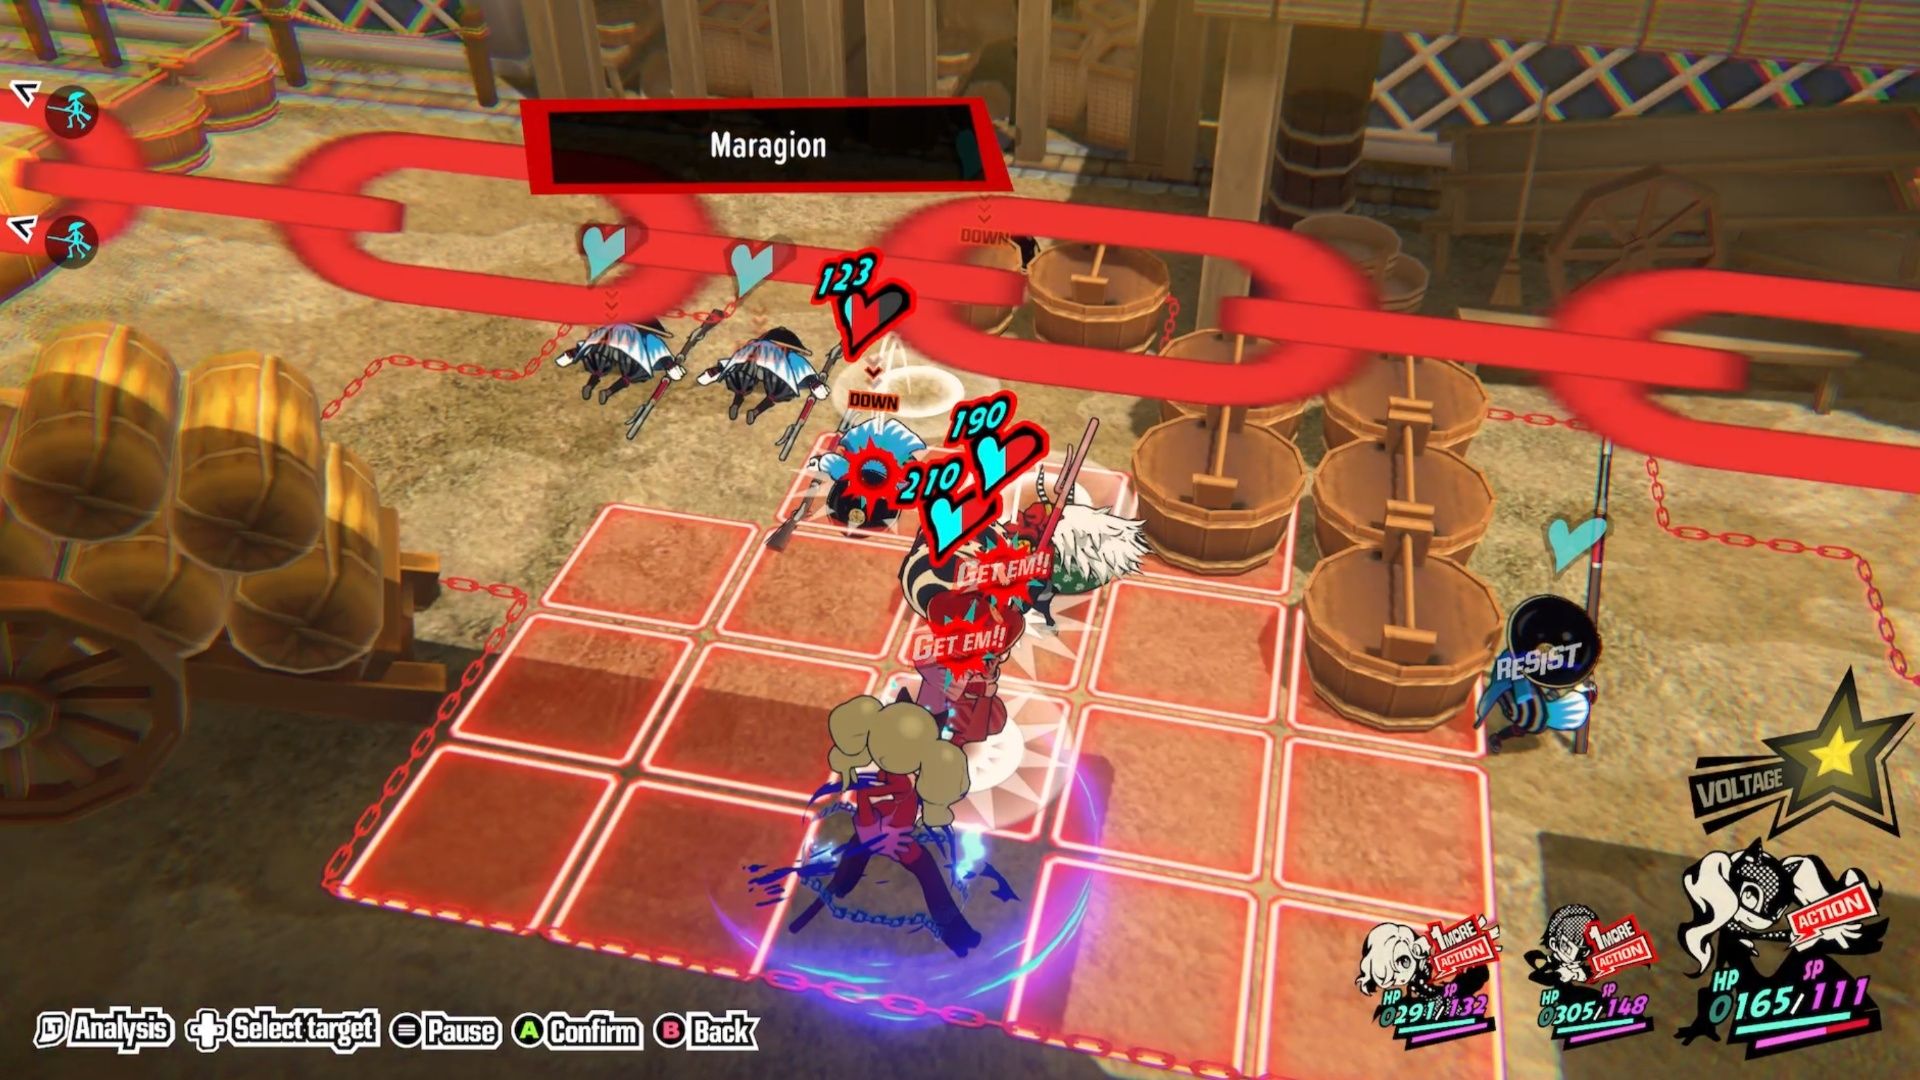 Ann using her Maragion on a group of enemies during Quest Nine of Persona 5 Tactica.